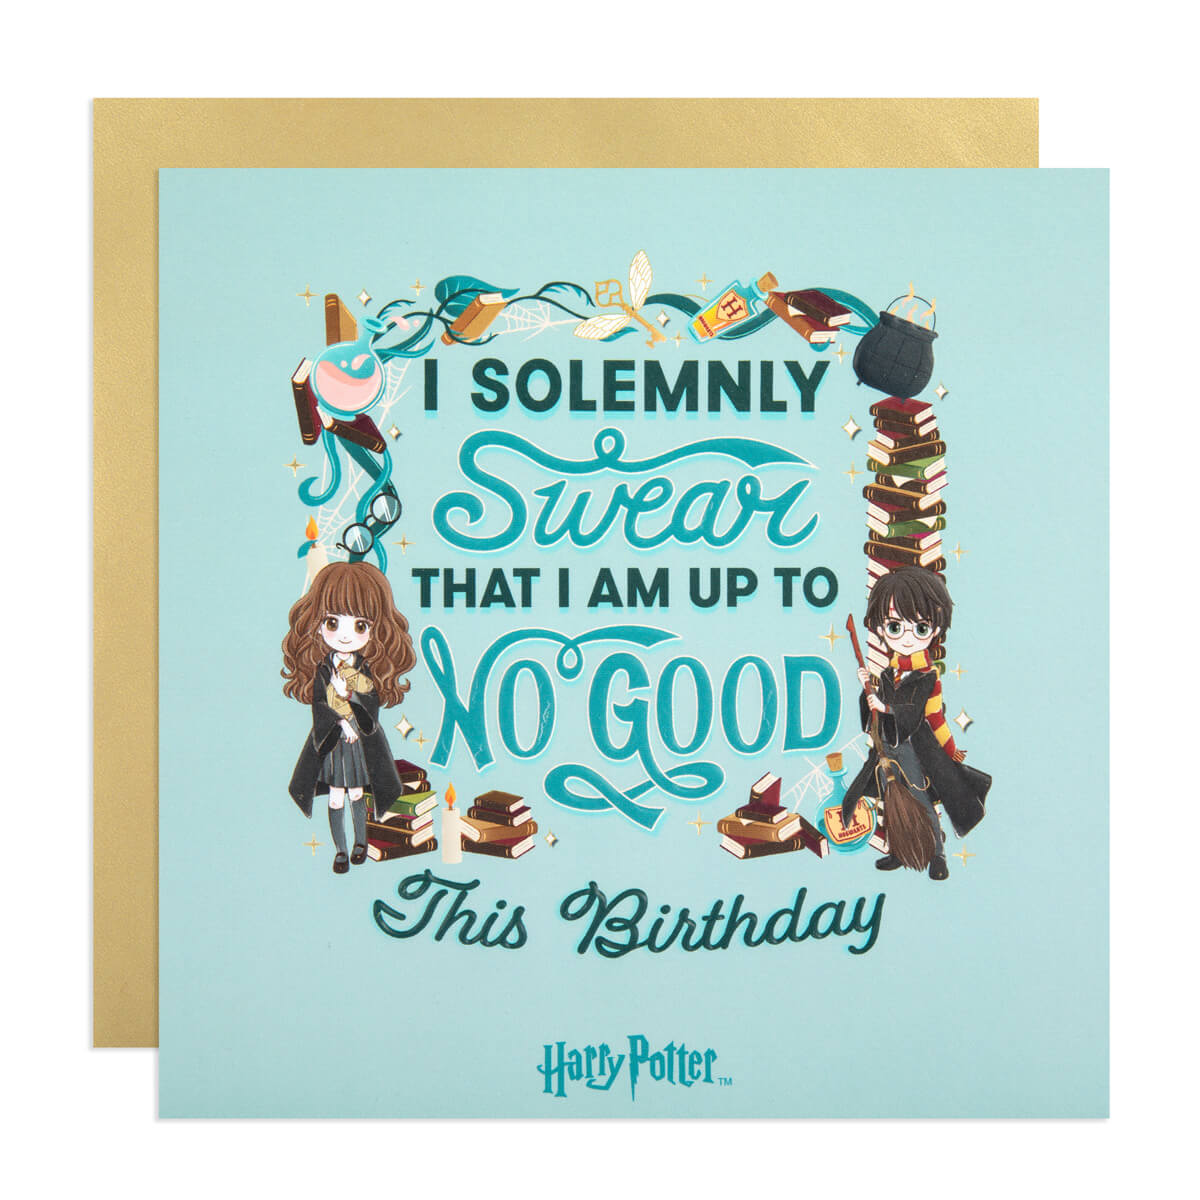 Happy Birthday Pictures - 55 Beautiful Greeting Cards For Free